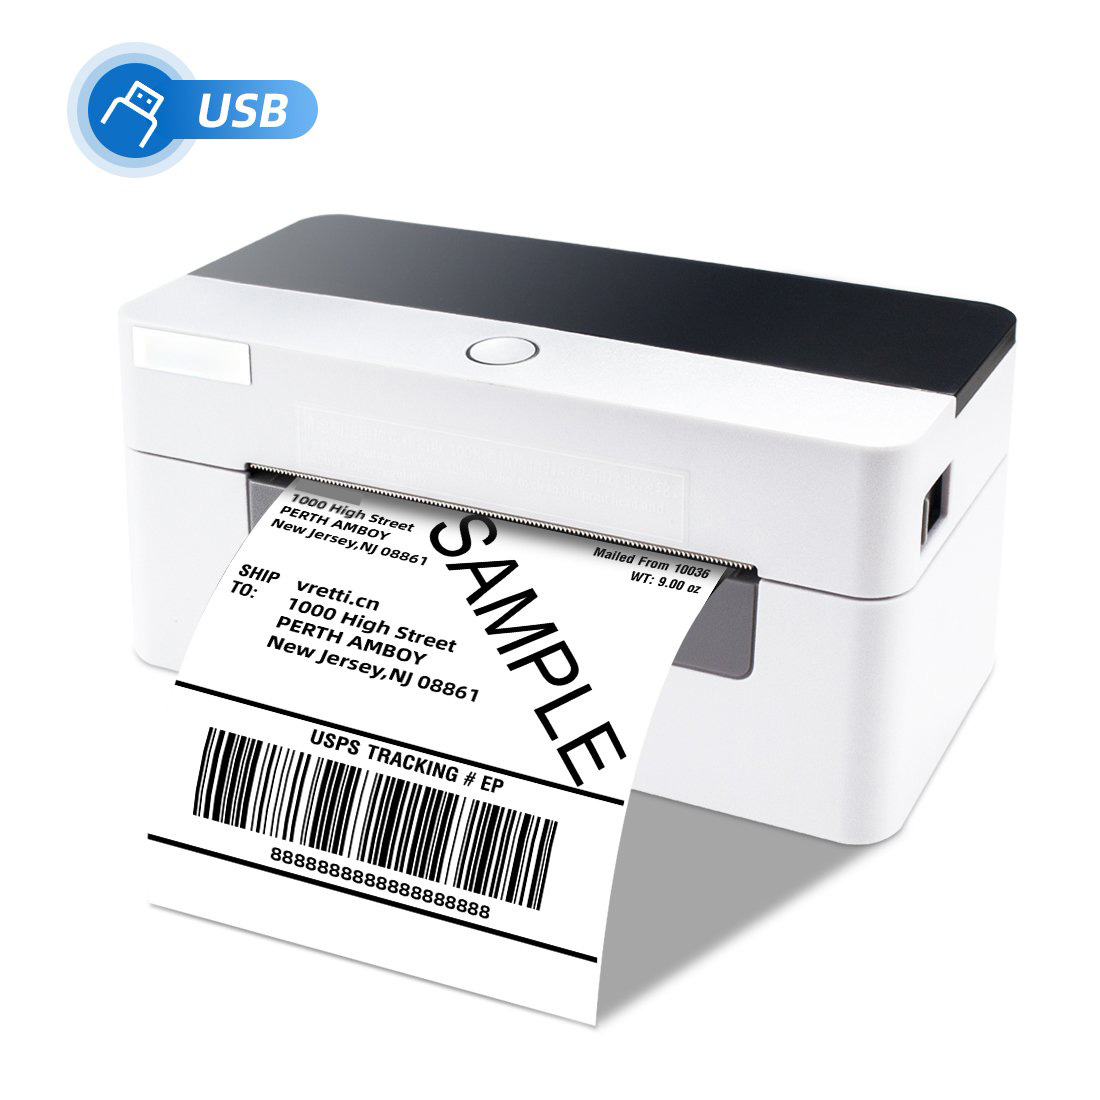 Direct Thermal Label Printer,Shipping Label Printer 4x6 for Small Business, Thermal Barcode Printer Compatible with Shopify, USPS, UPS, FedEx.